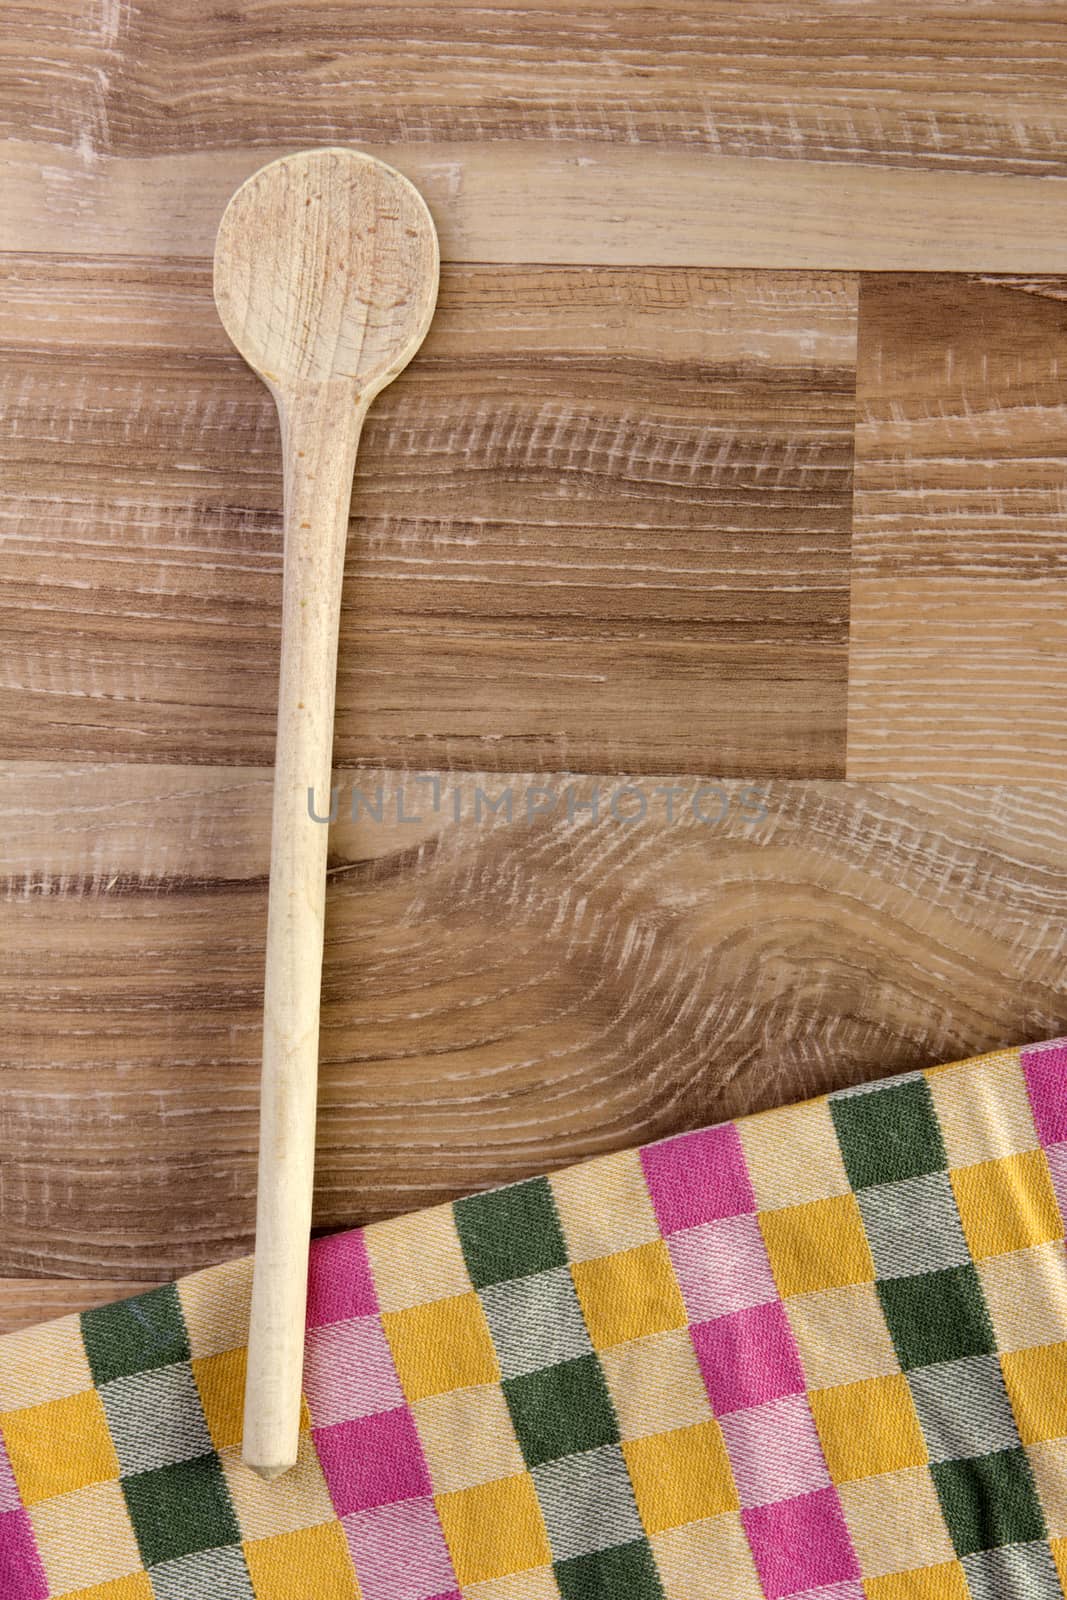 Wooden spoon on wood with colorful tea towel on wooden background 